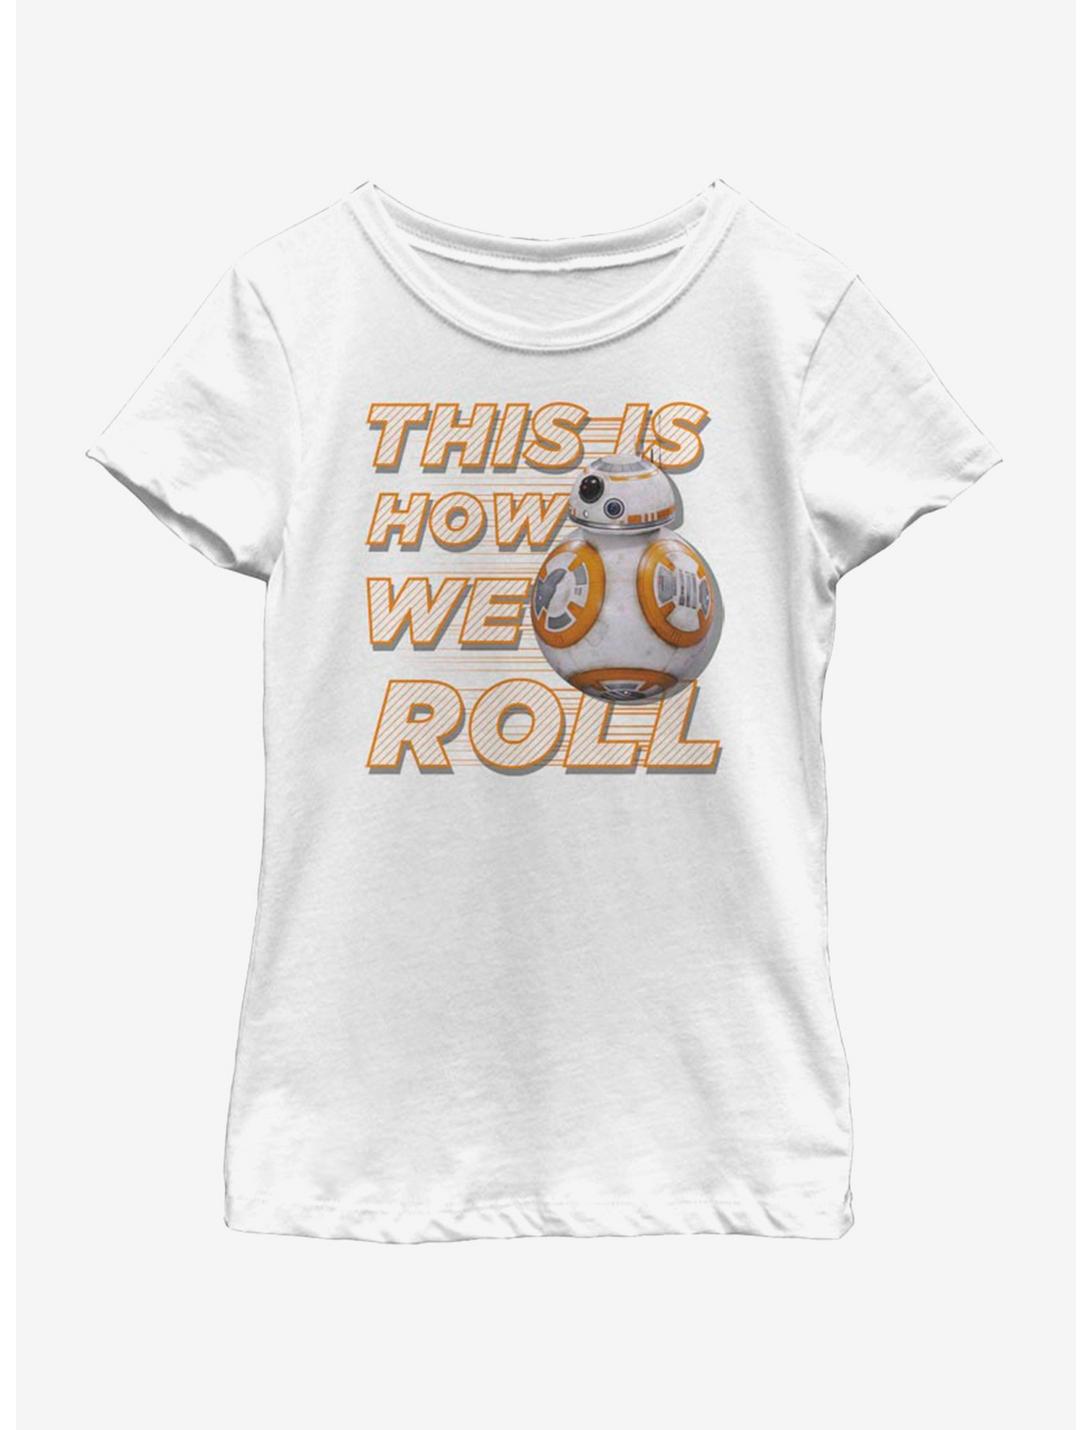 Star Wars: The Force Awakens This Is How We Roll Back Youth Girls T-Shirt, WHITE, hi-res